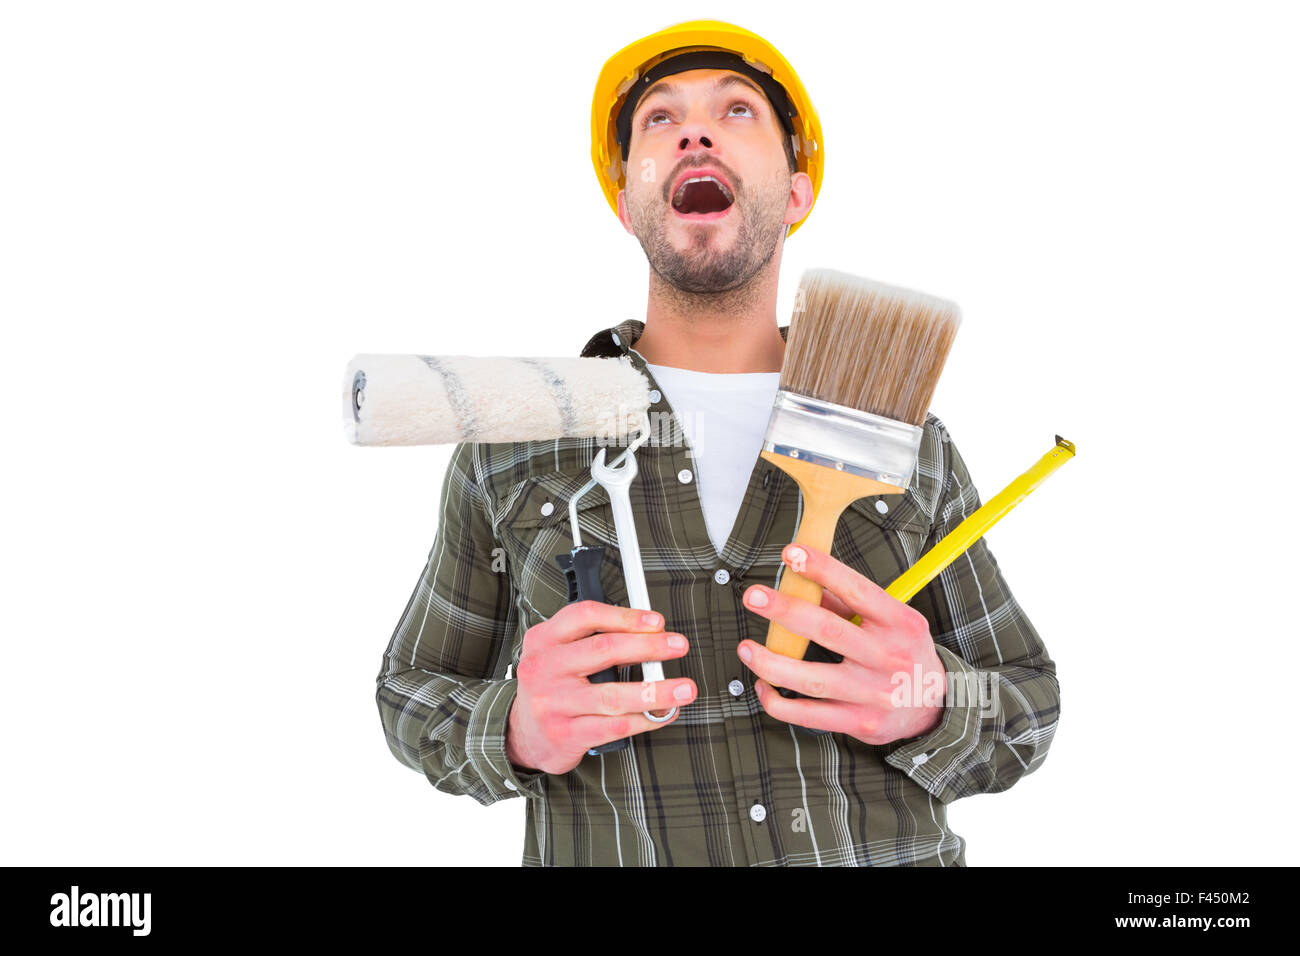 Screaming manual worker holding various tools Stock Photo